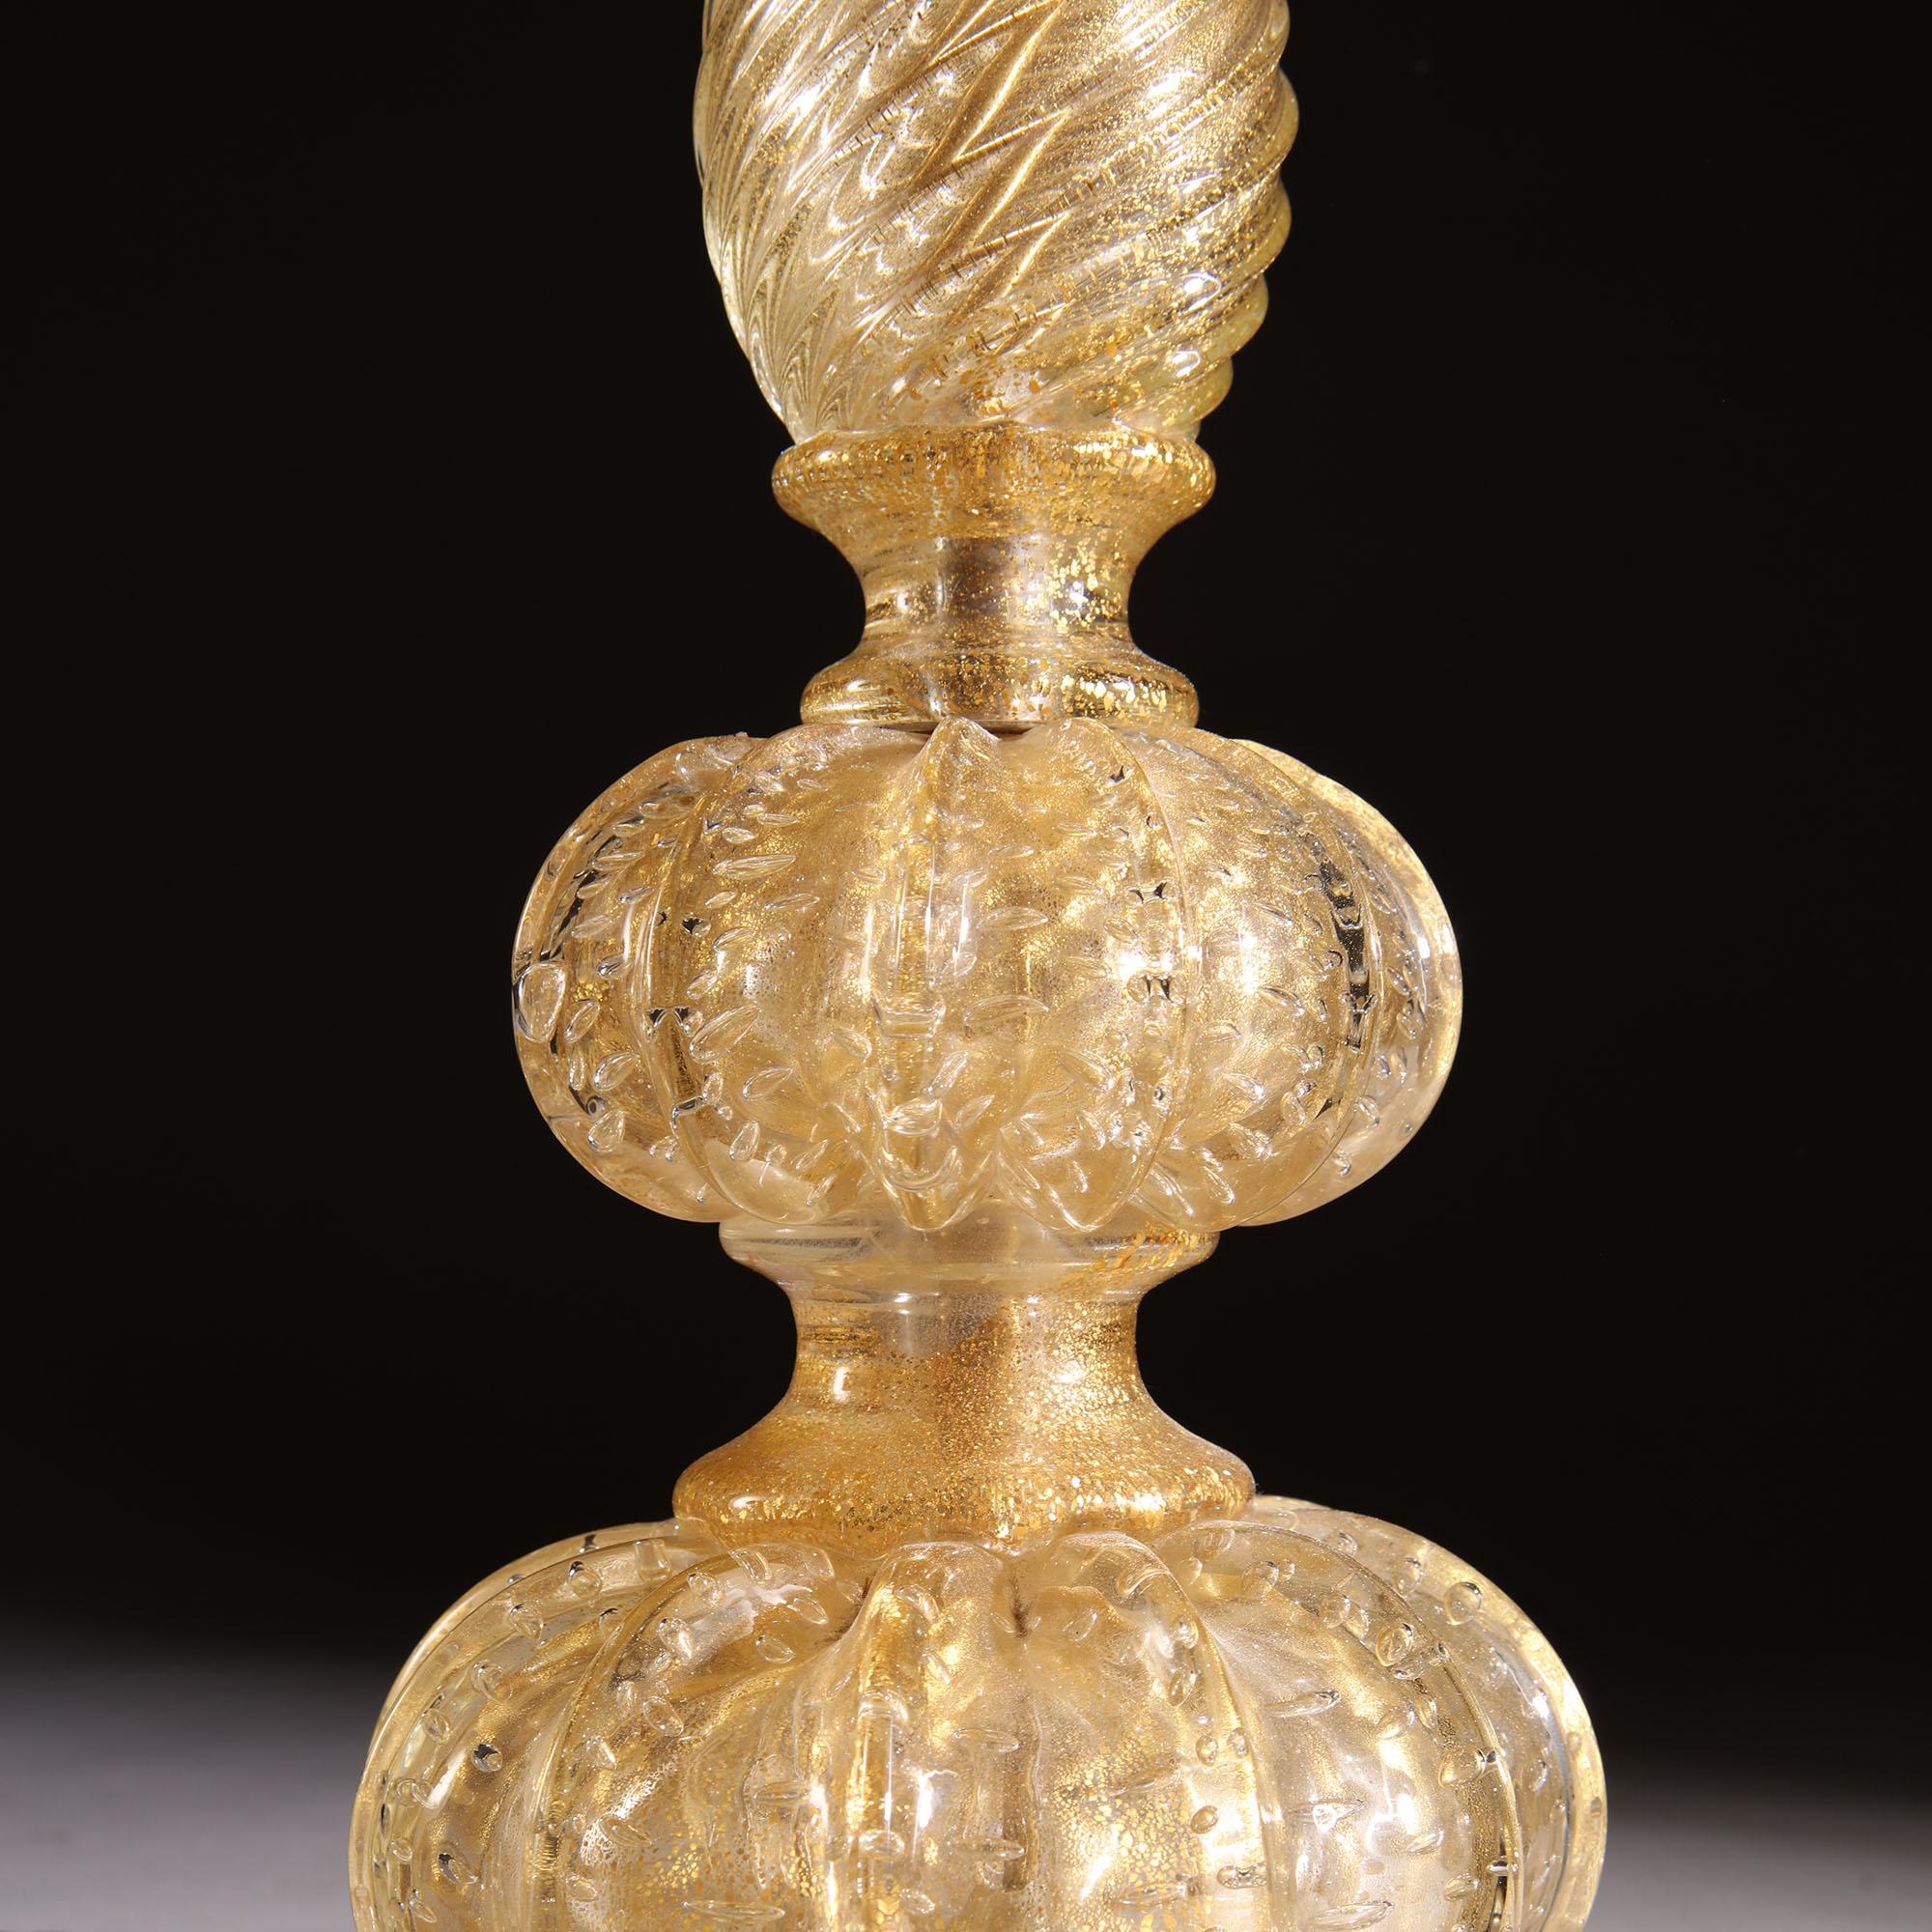 Italian Murano Glass Lamp by Barovier & Toso with Gold Twisted Pulegoso Glass Stem